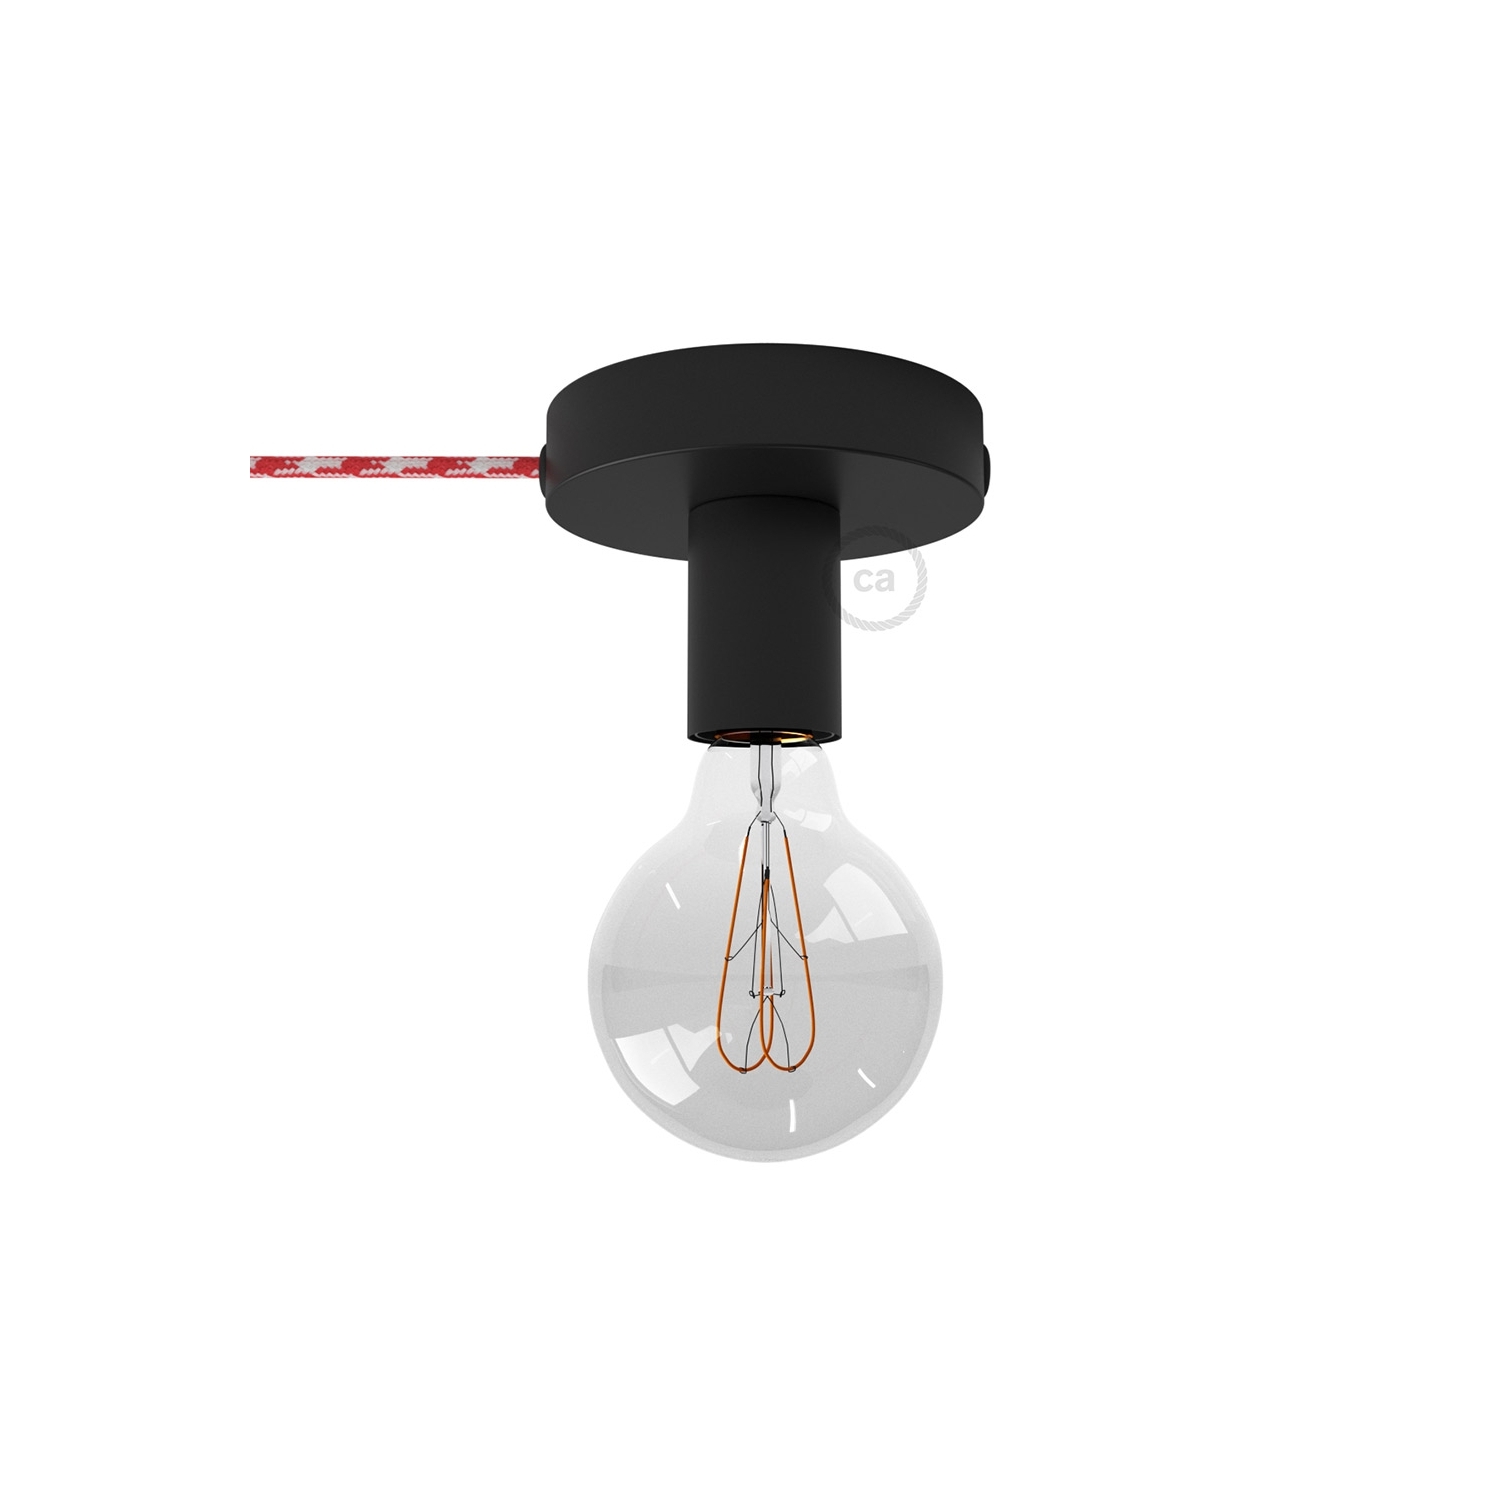 Spostaluce, the black metal light source with fabric cable and side holes